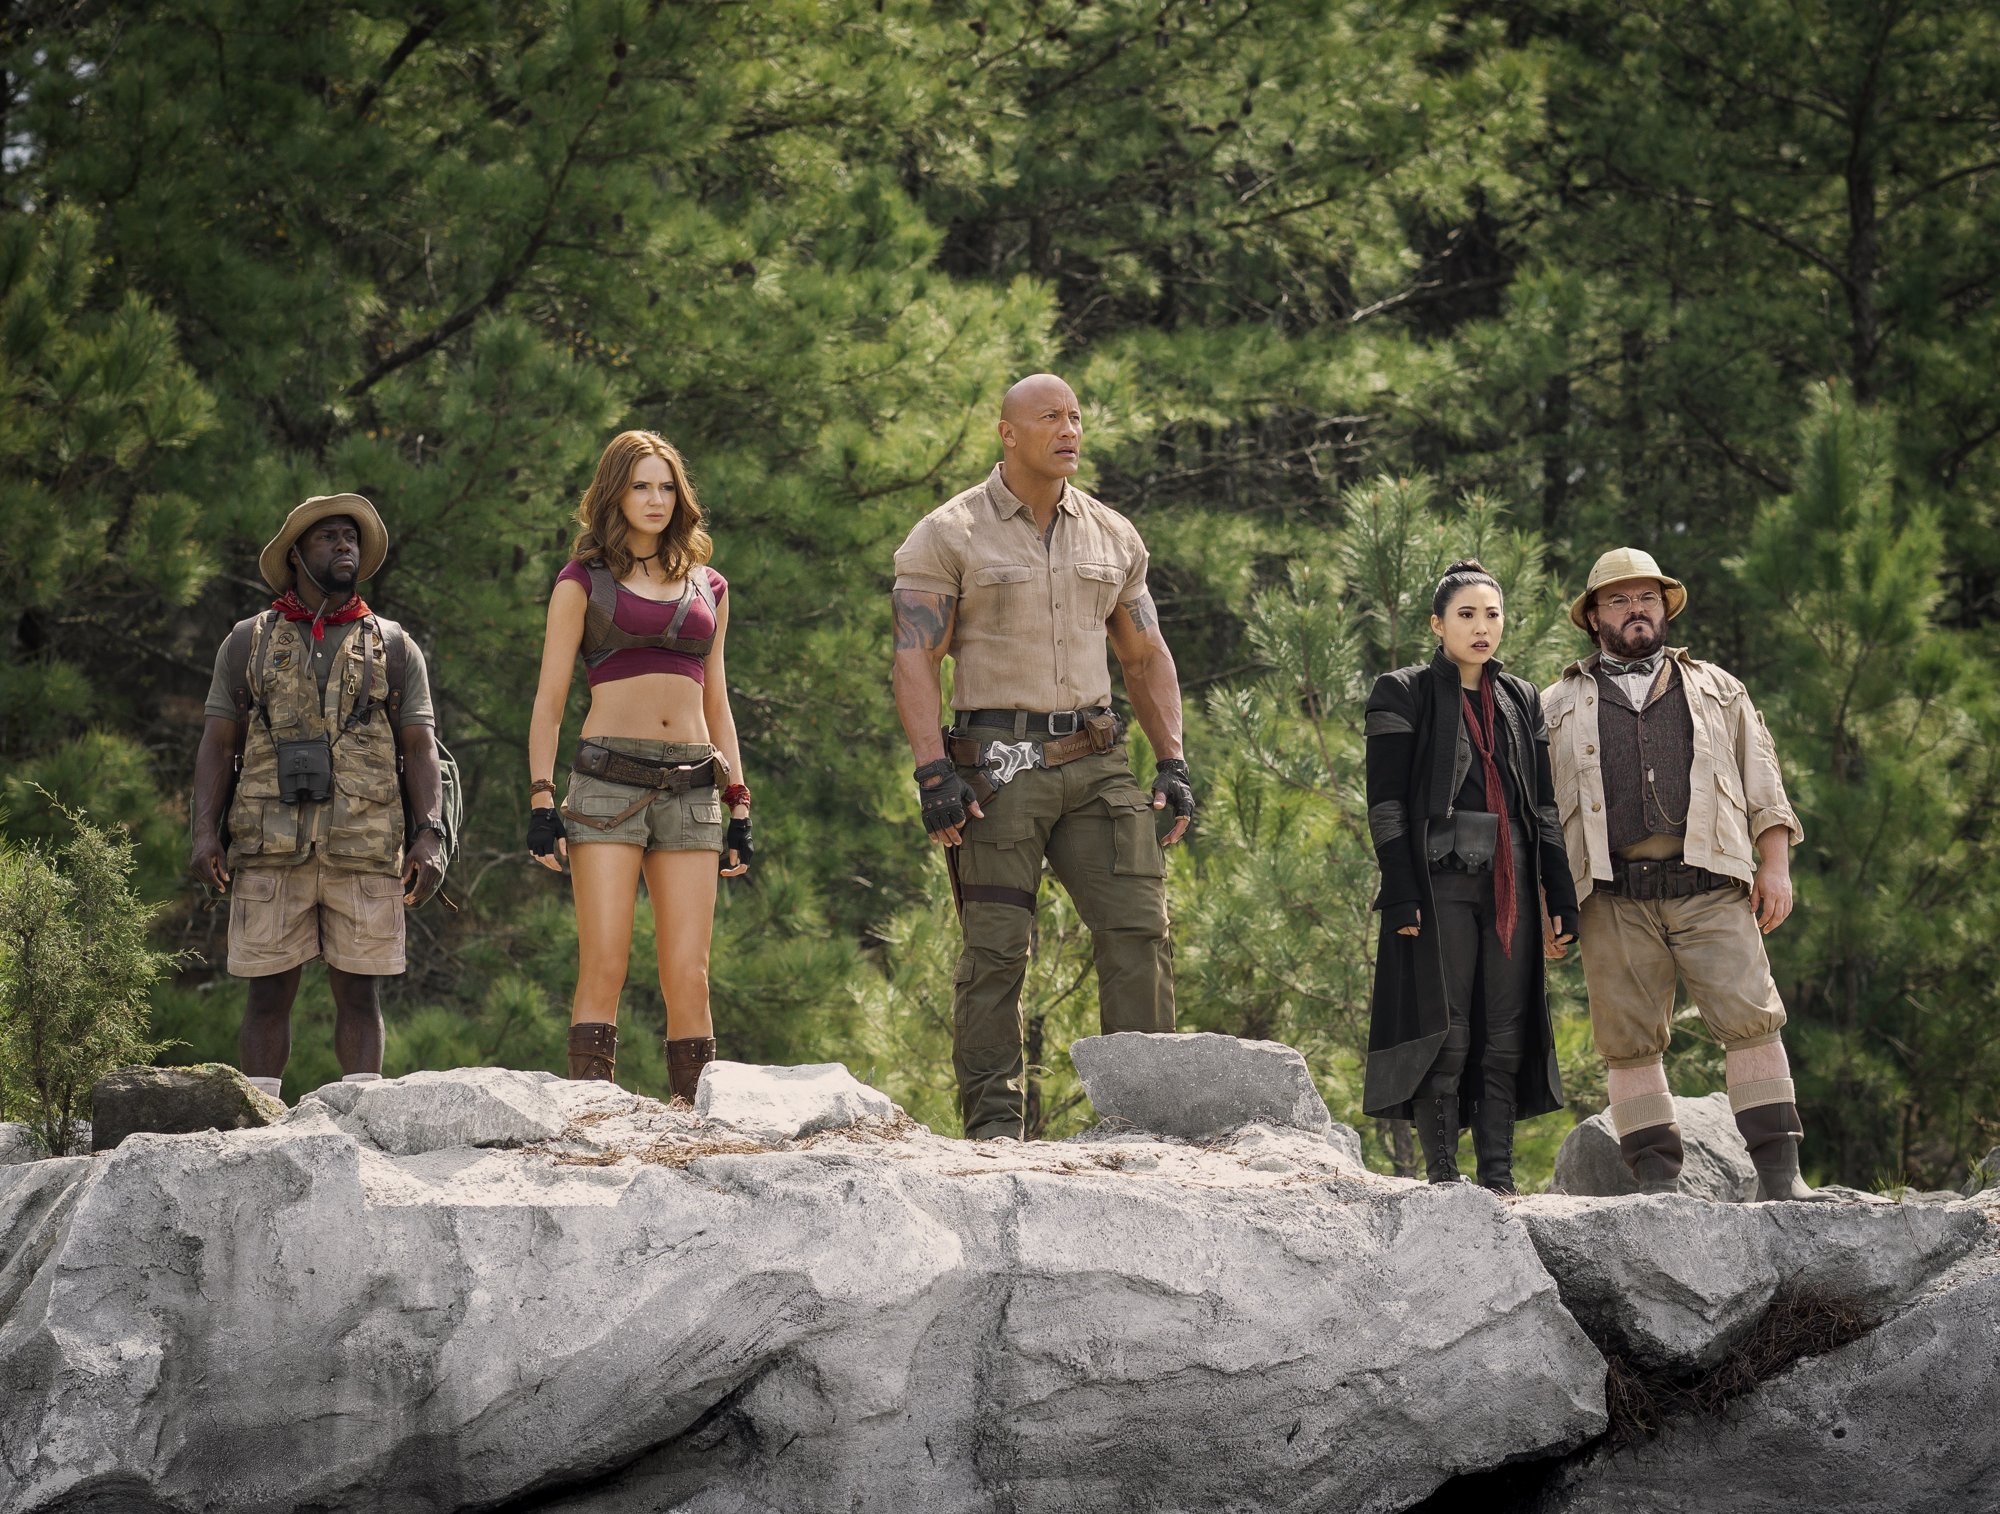 Kevin Hart, Karen Gillan, The Rock, Awkwafina and Jack Black in Sony Pictures' Jumanji: The Next Level (2019)